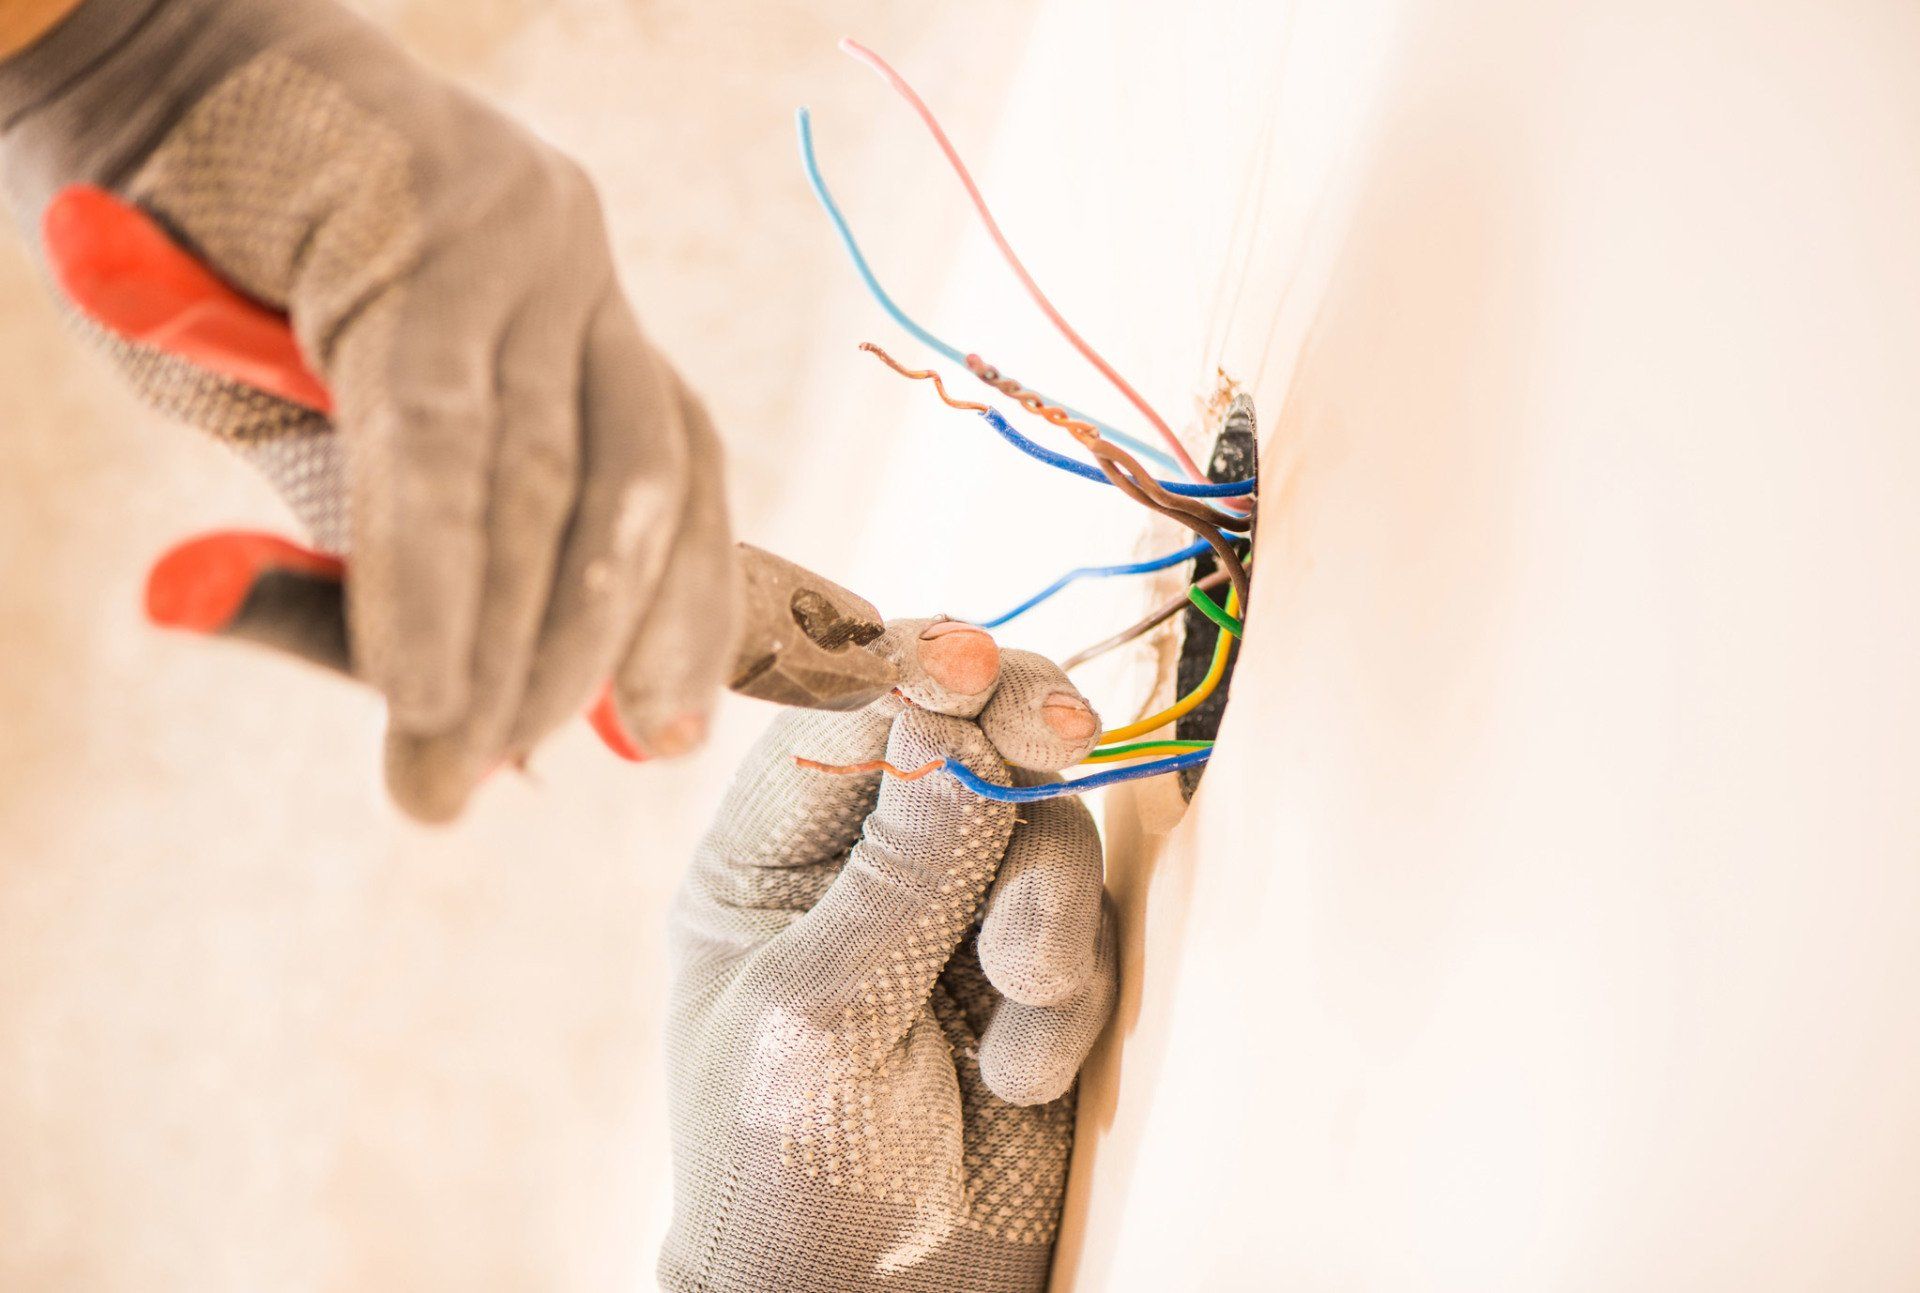 Electrical Services — Electrician Fixing the Wire in Venice, FL